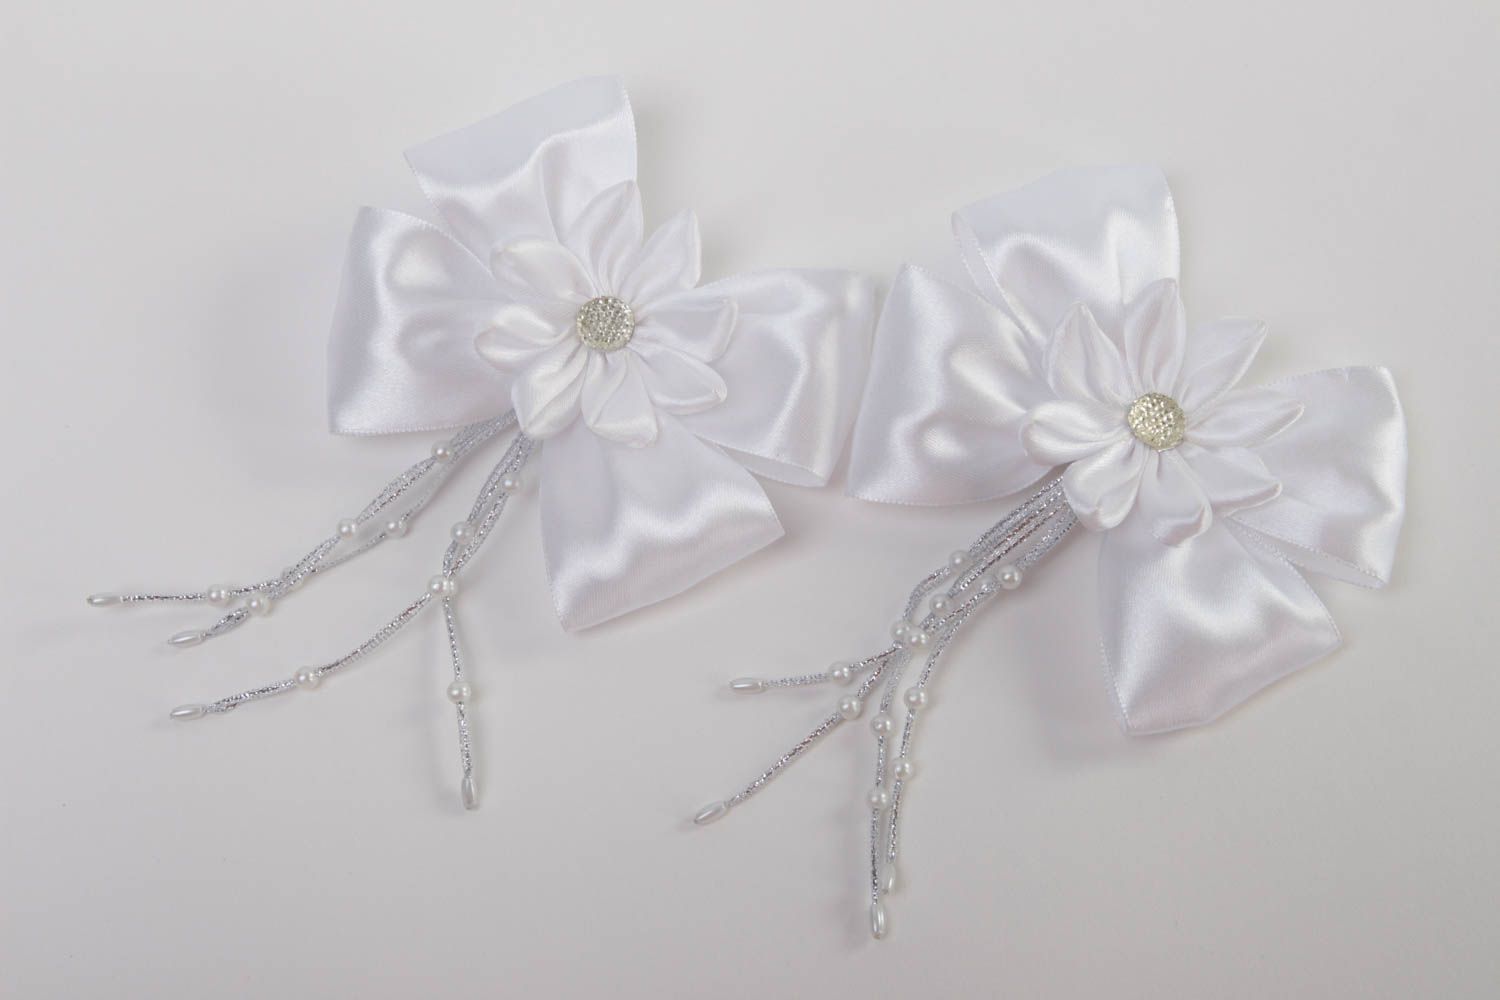 White hair clips with bows stylish festive accessories set of 2 pieces photo 2